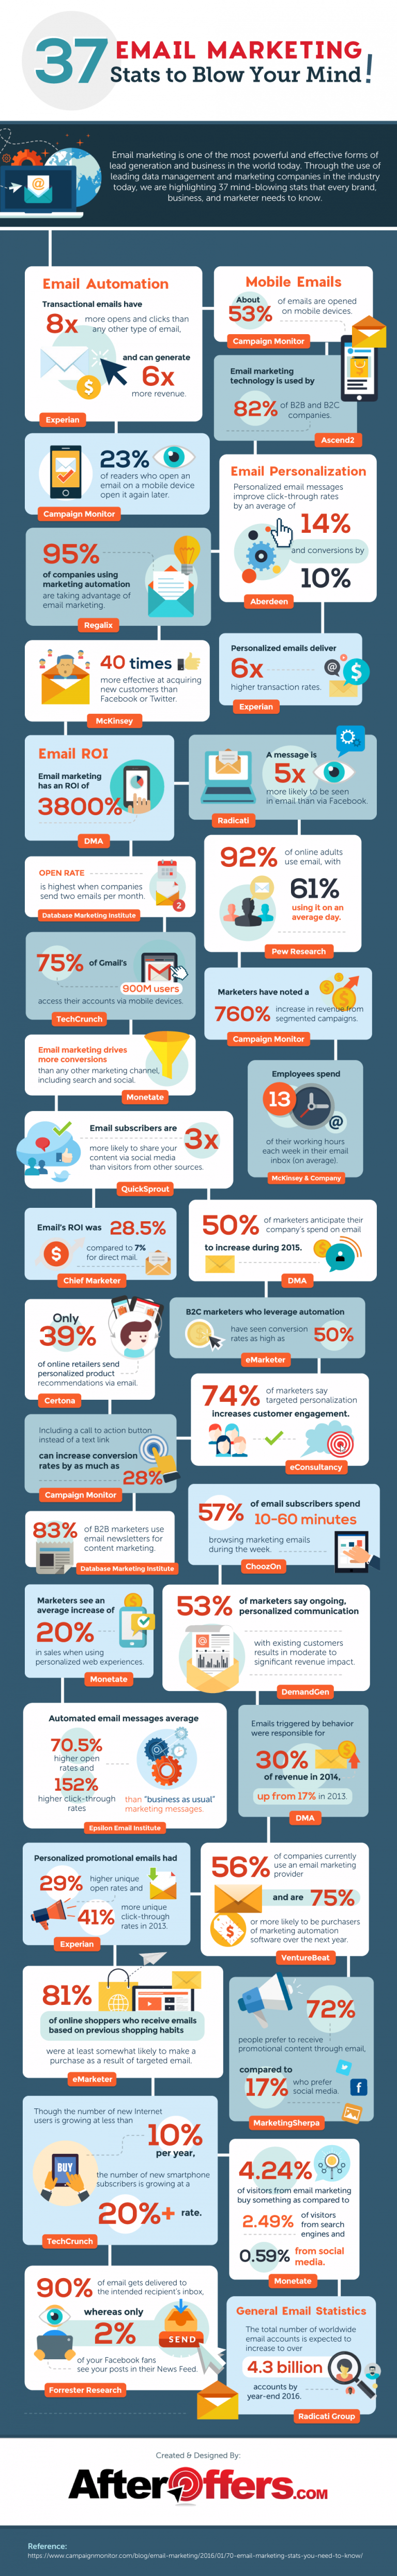 37 Reasons Why Email Marketing Still Matters [Infographic]